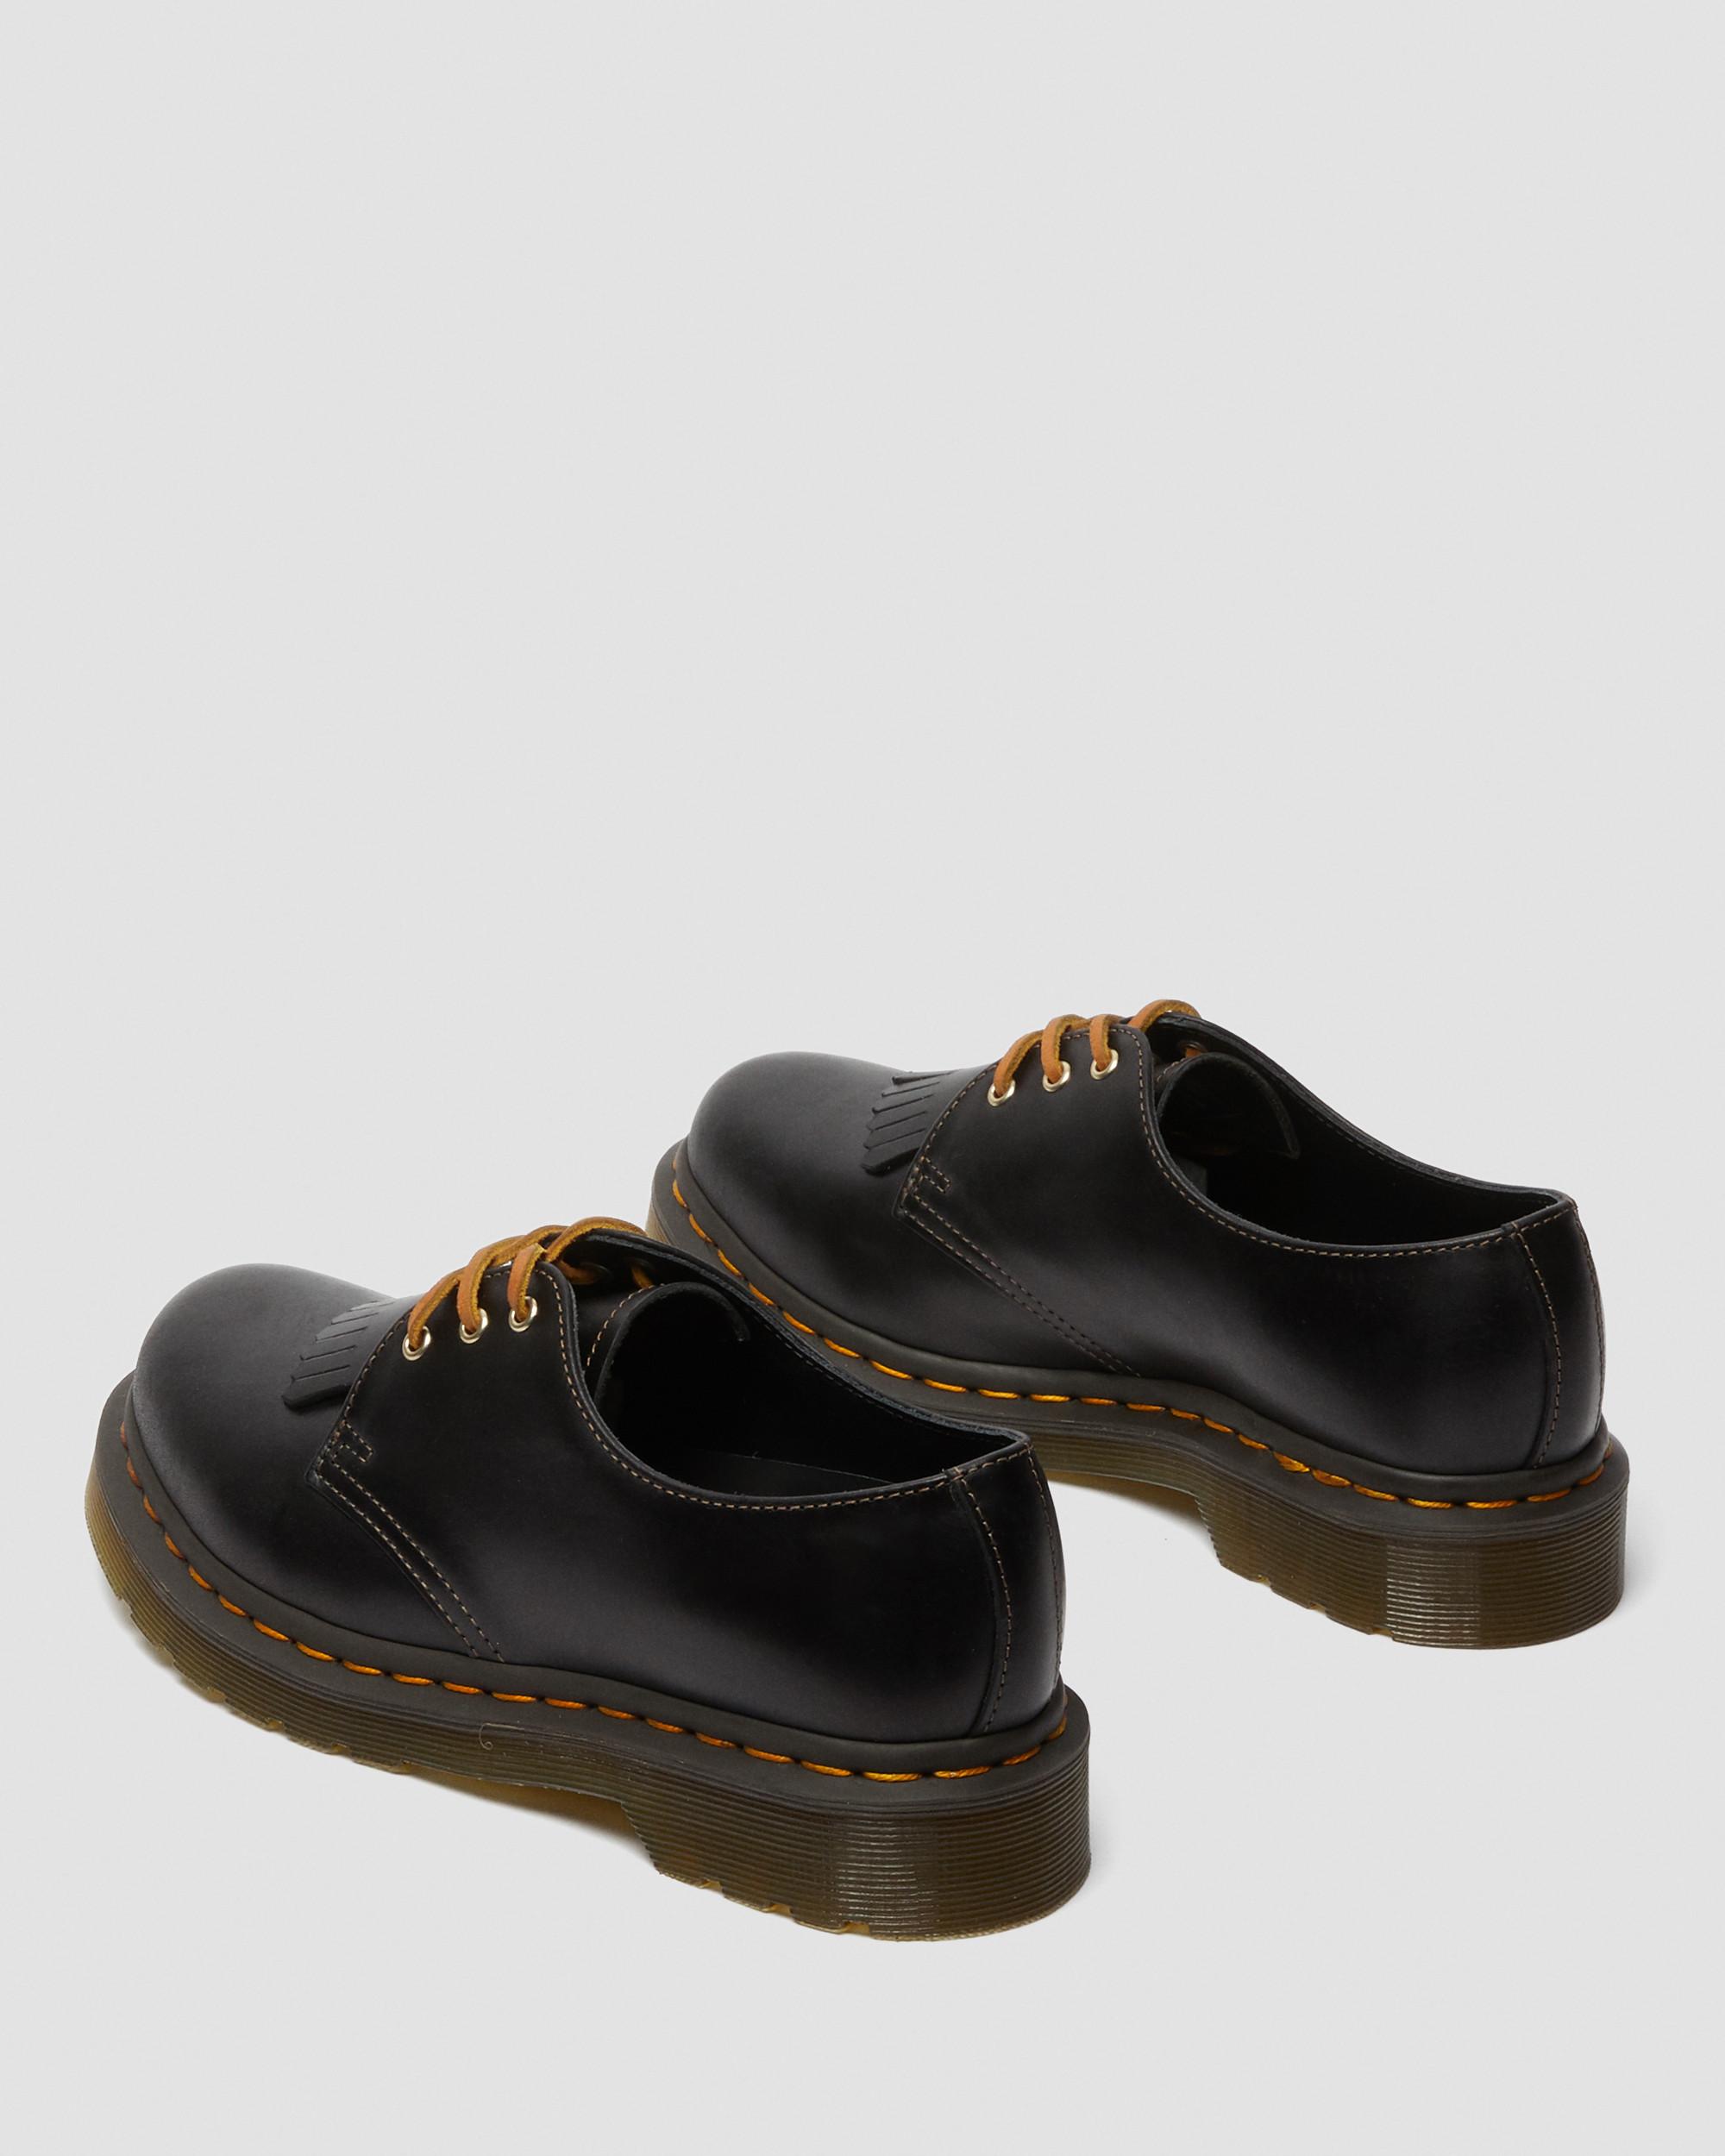 1461 Women's Abruzzo Leather Oxford Shoes | Dr. Martens